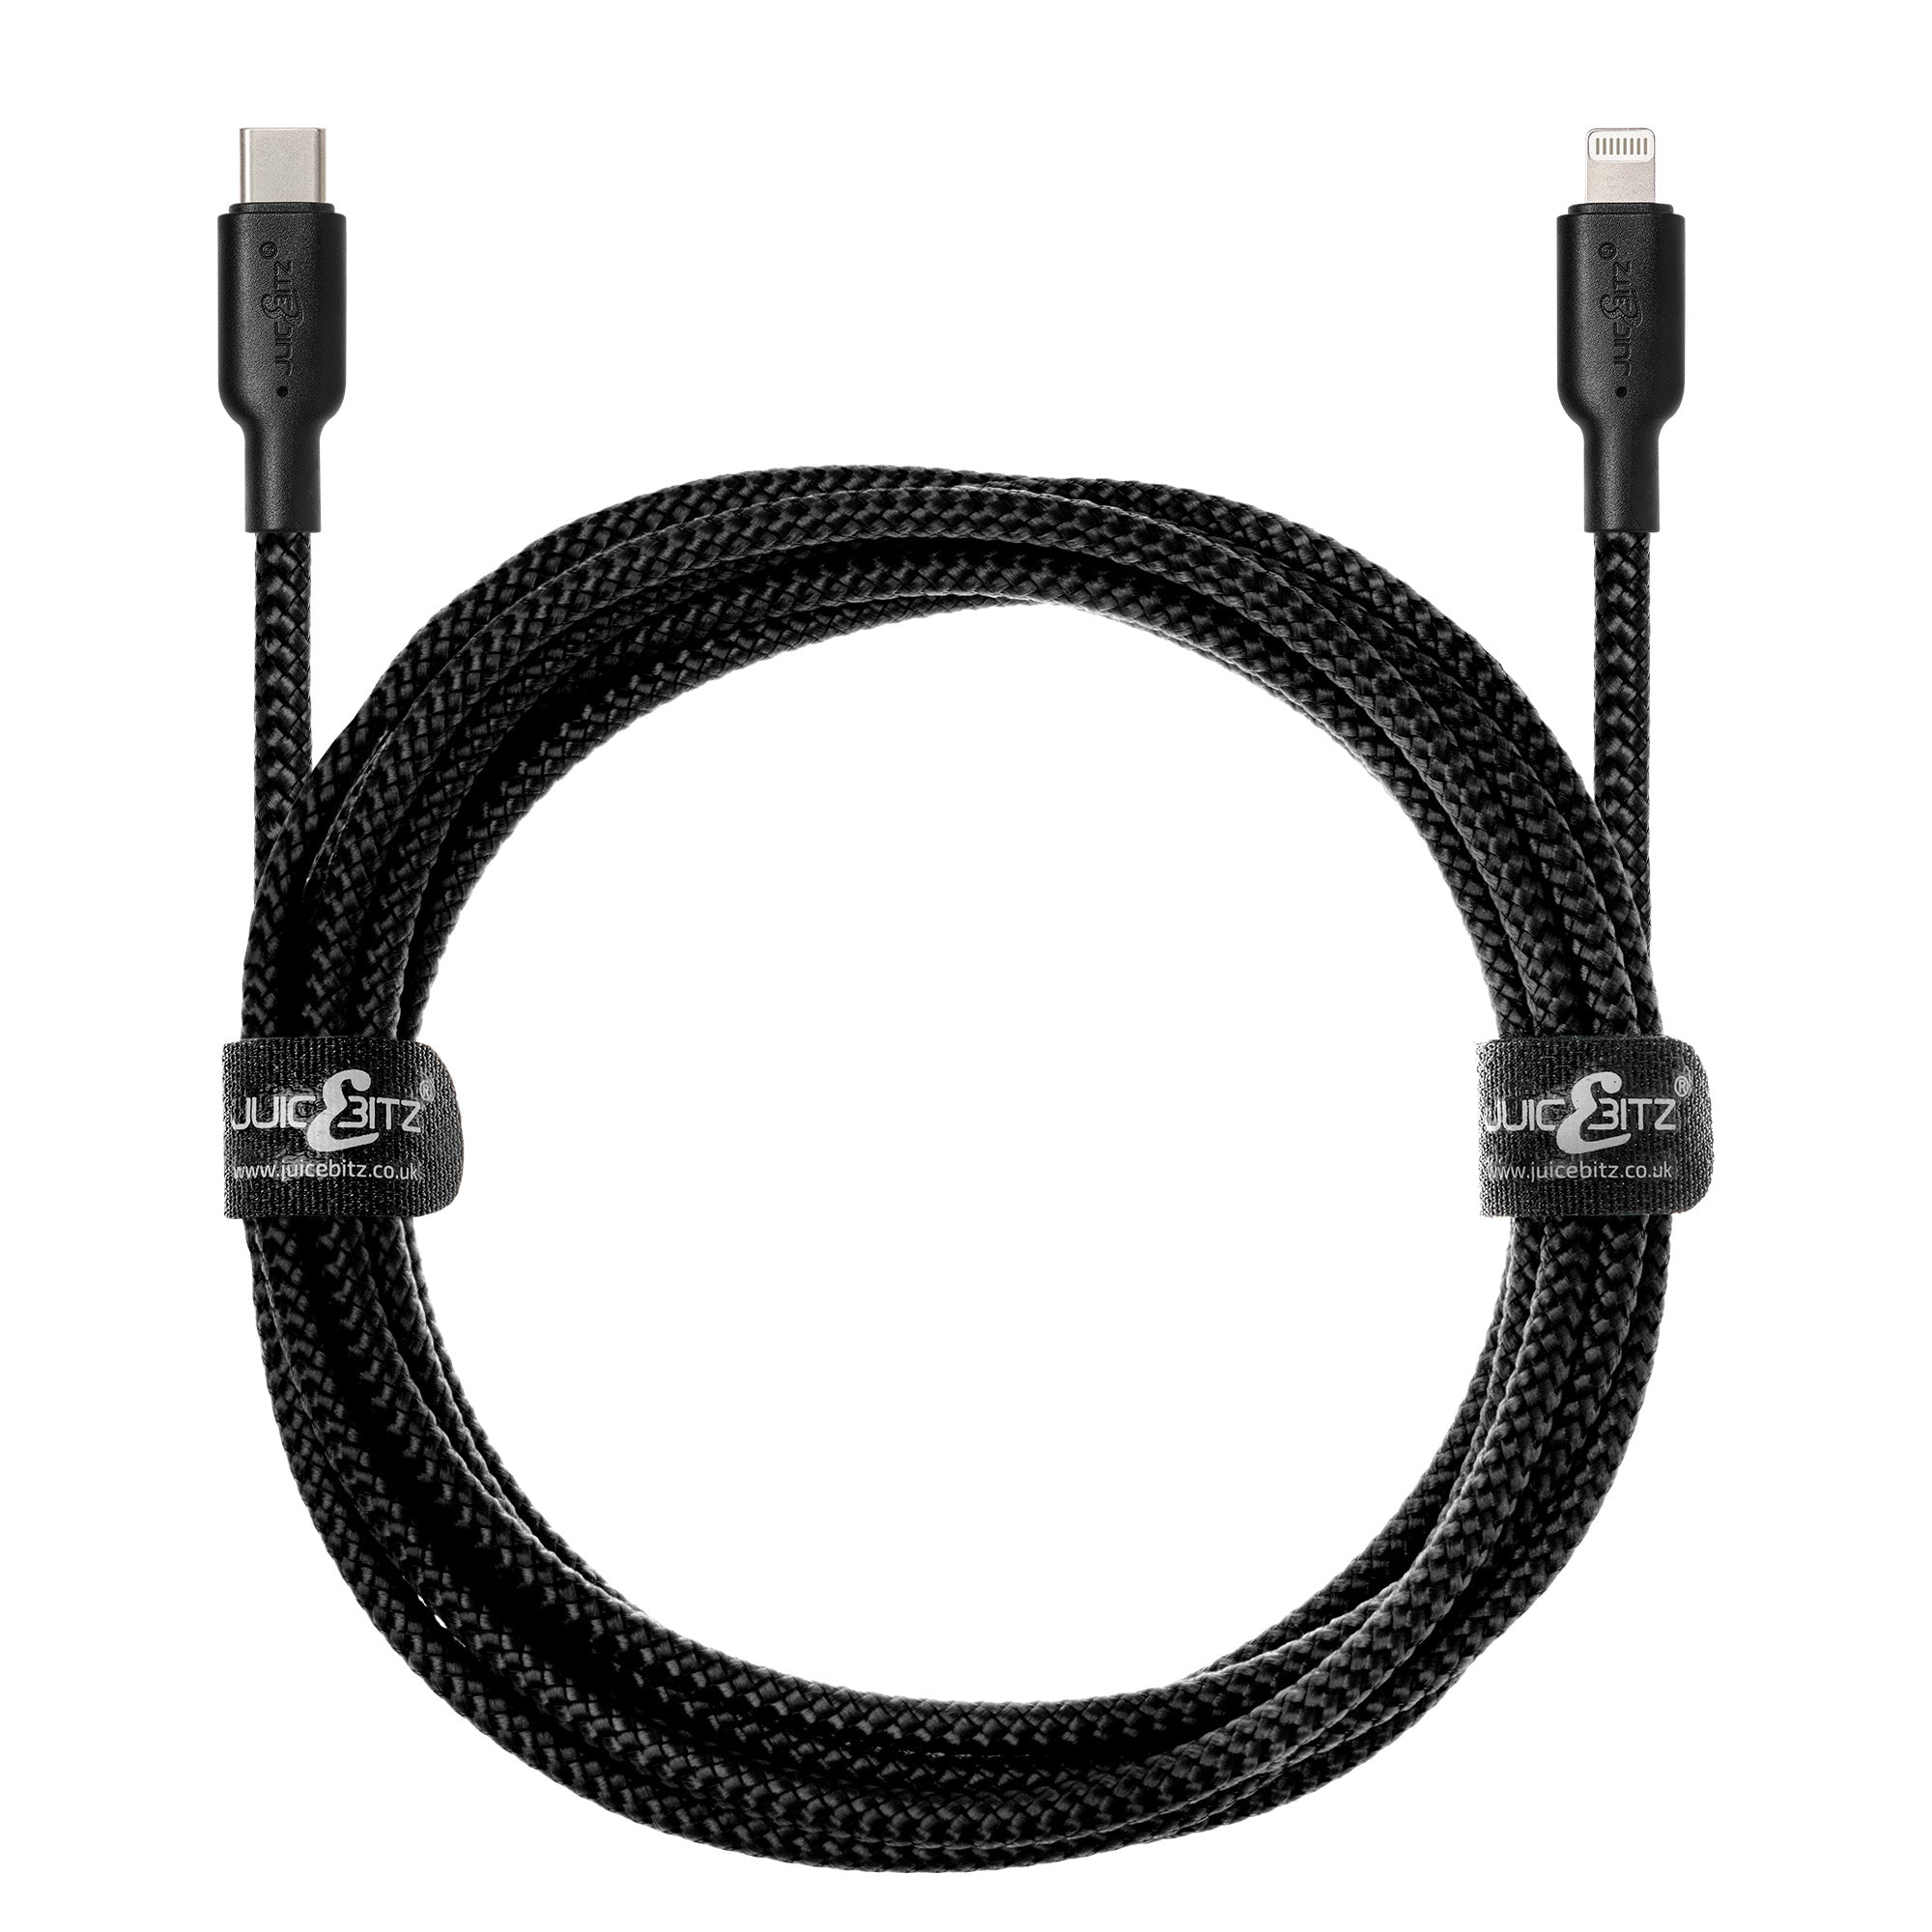 Braided Heavy Duty USB-C Fast Charger Data Sync Cable for iPhone, iPad, iPod - Black